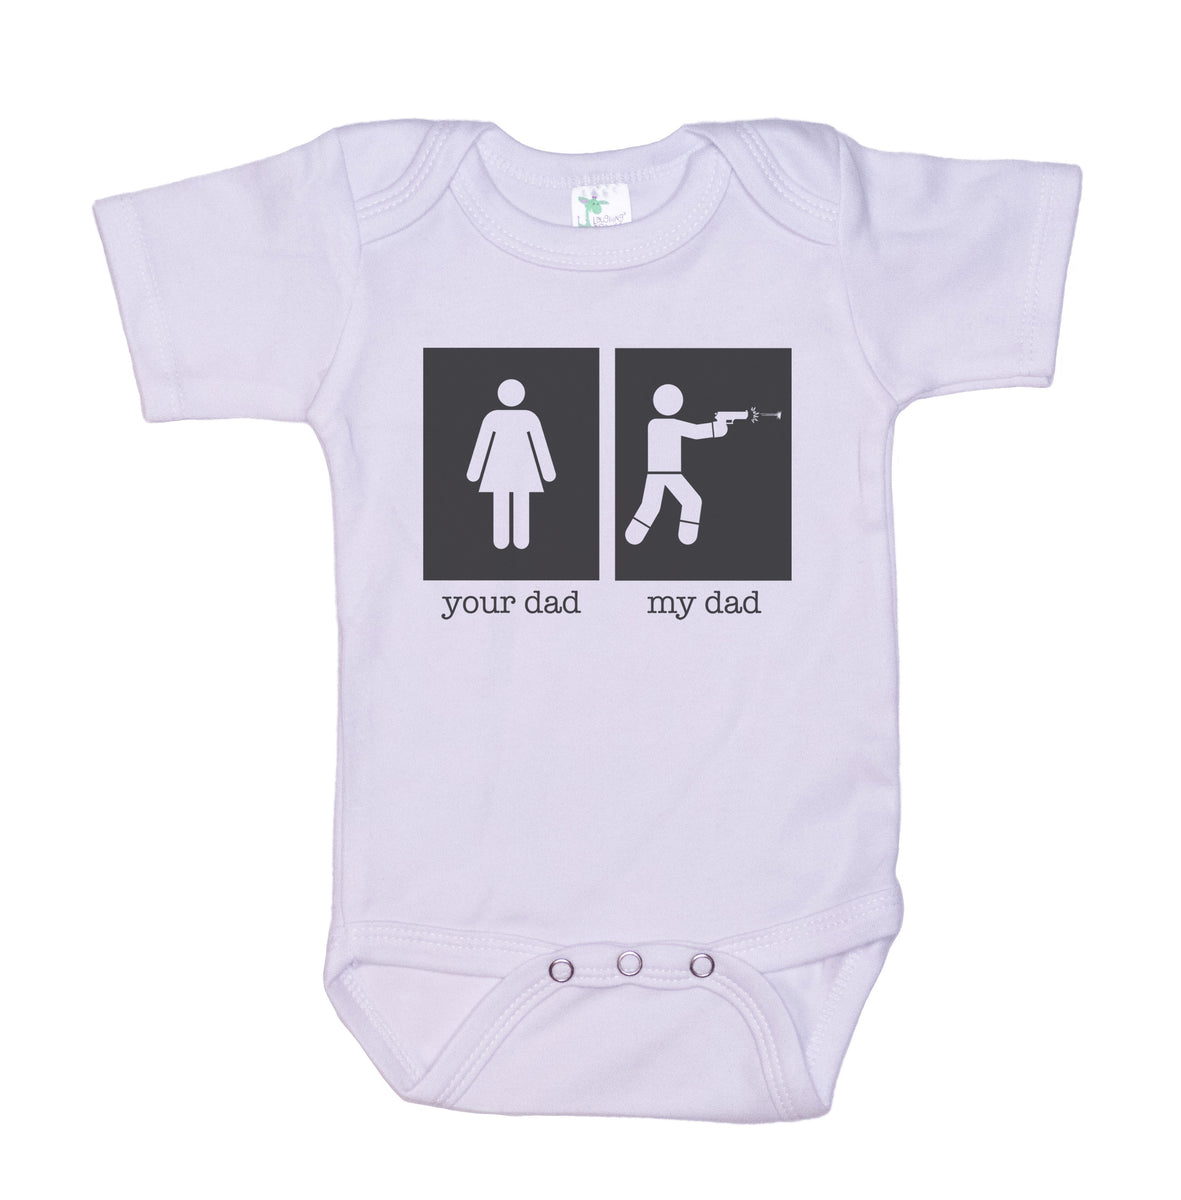 Tactical Baby Gear-Tactical Onesie®– Chase Me Tees LLC